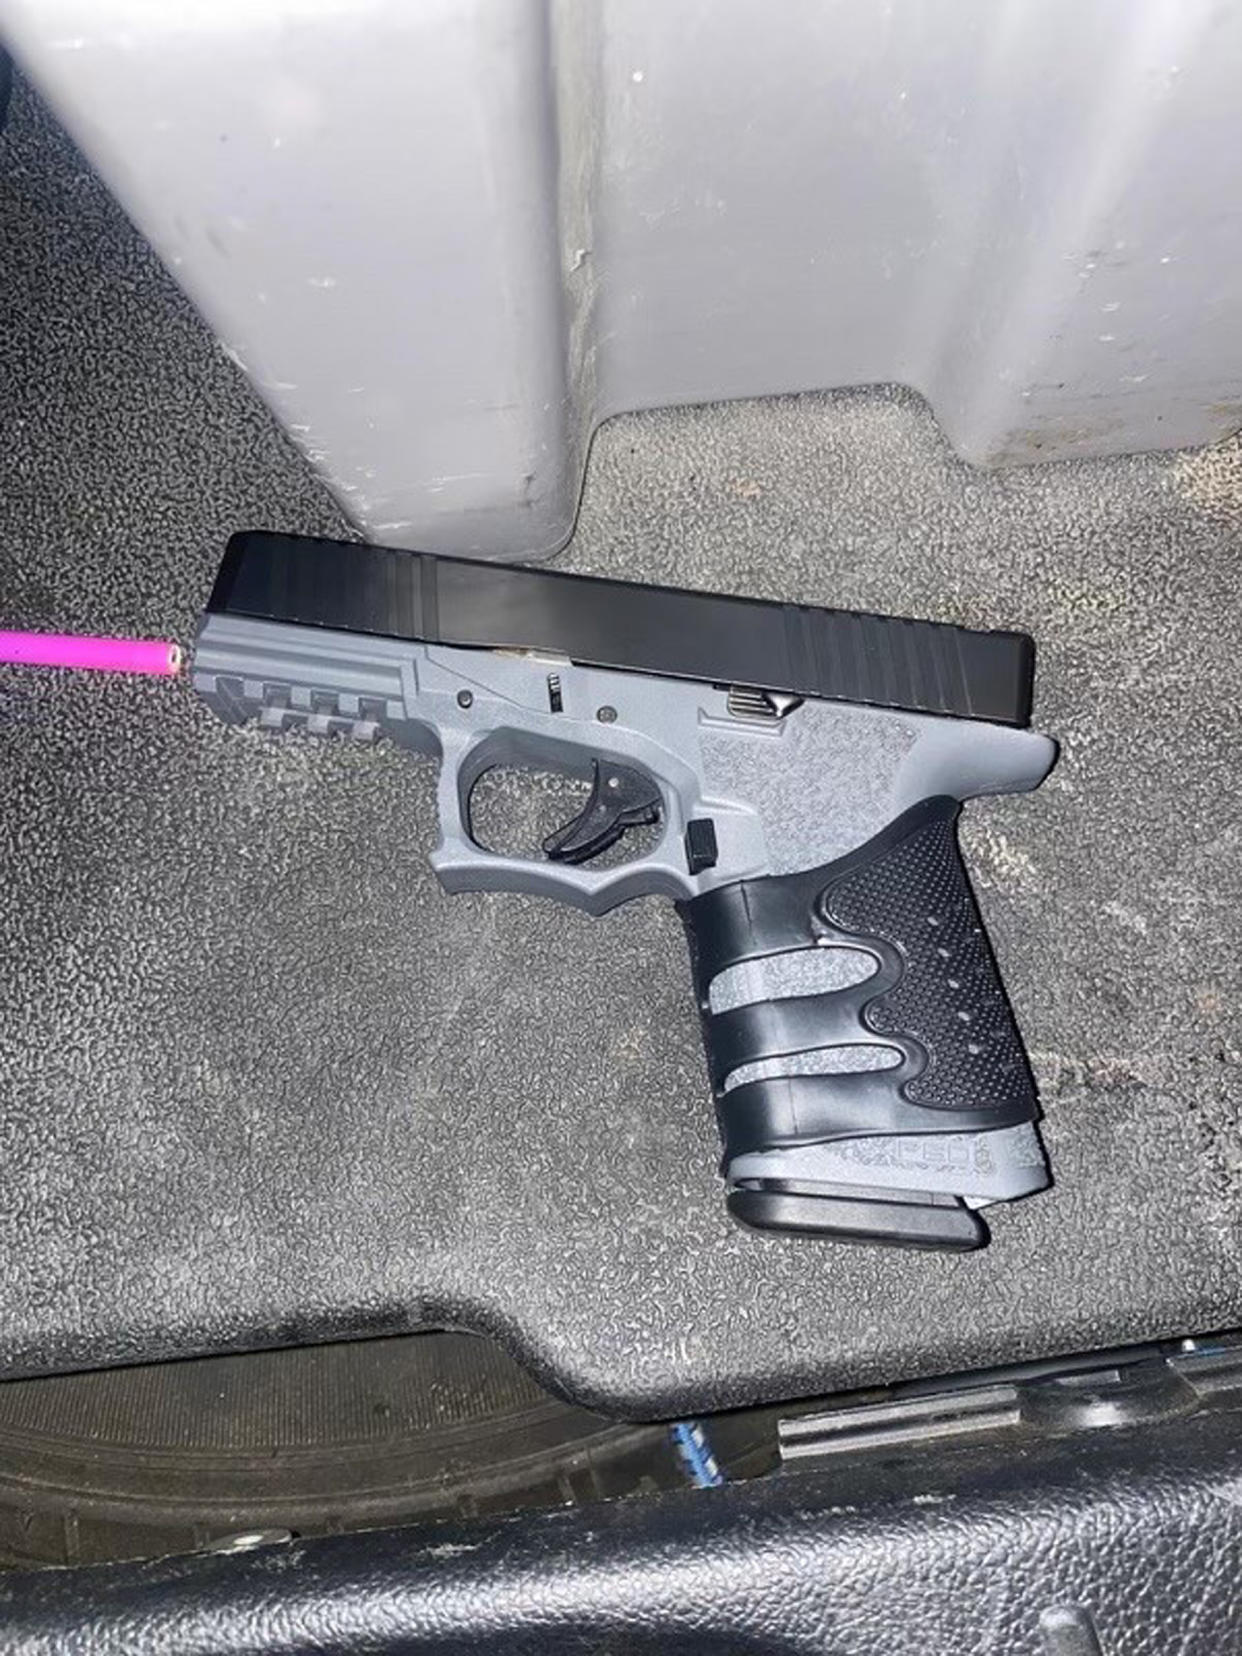 A firearm recovered during the arrest of the suspect in a series of killings in Stockton, Calif. (Stockton Police Department via Facebook)